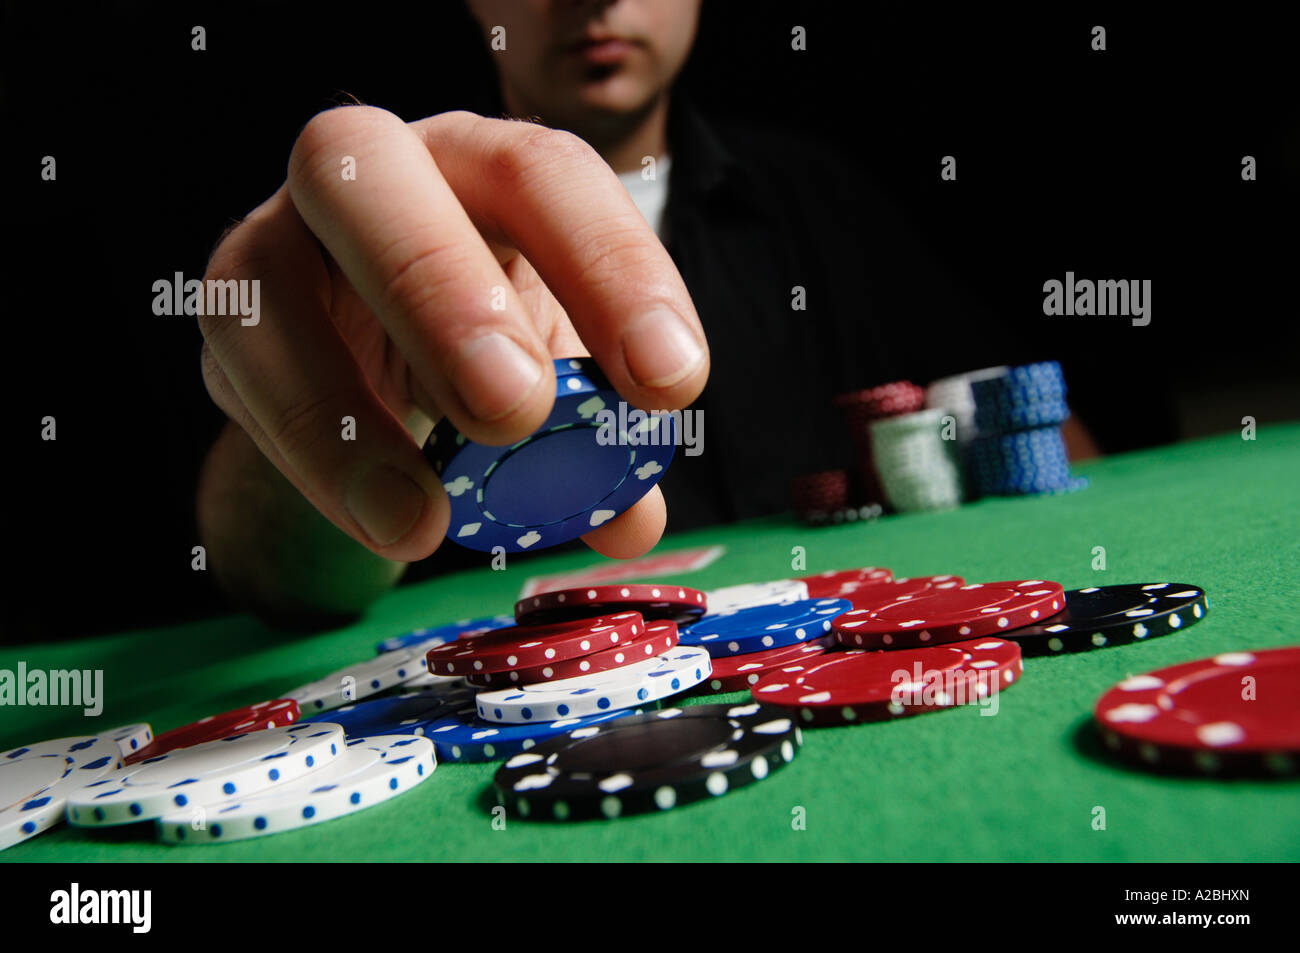 Young man putting chips into pot in poker game Stock Photo - Alamy